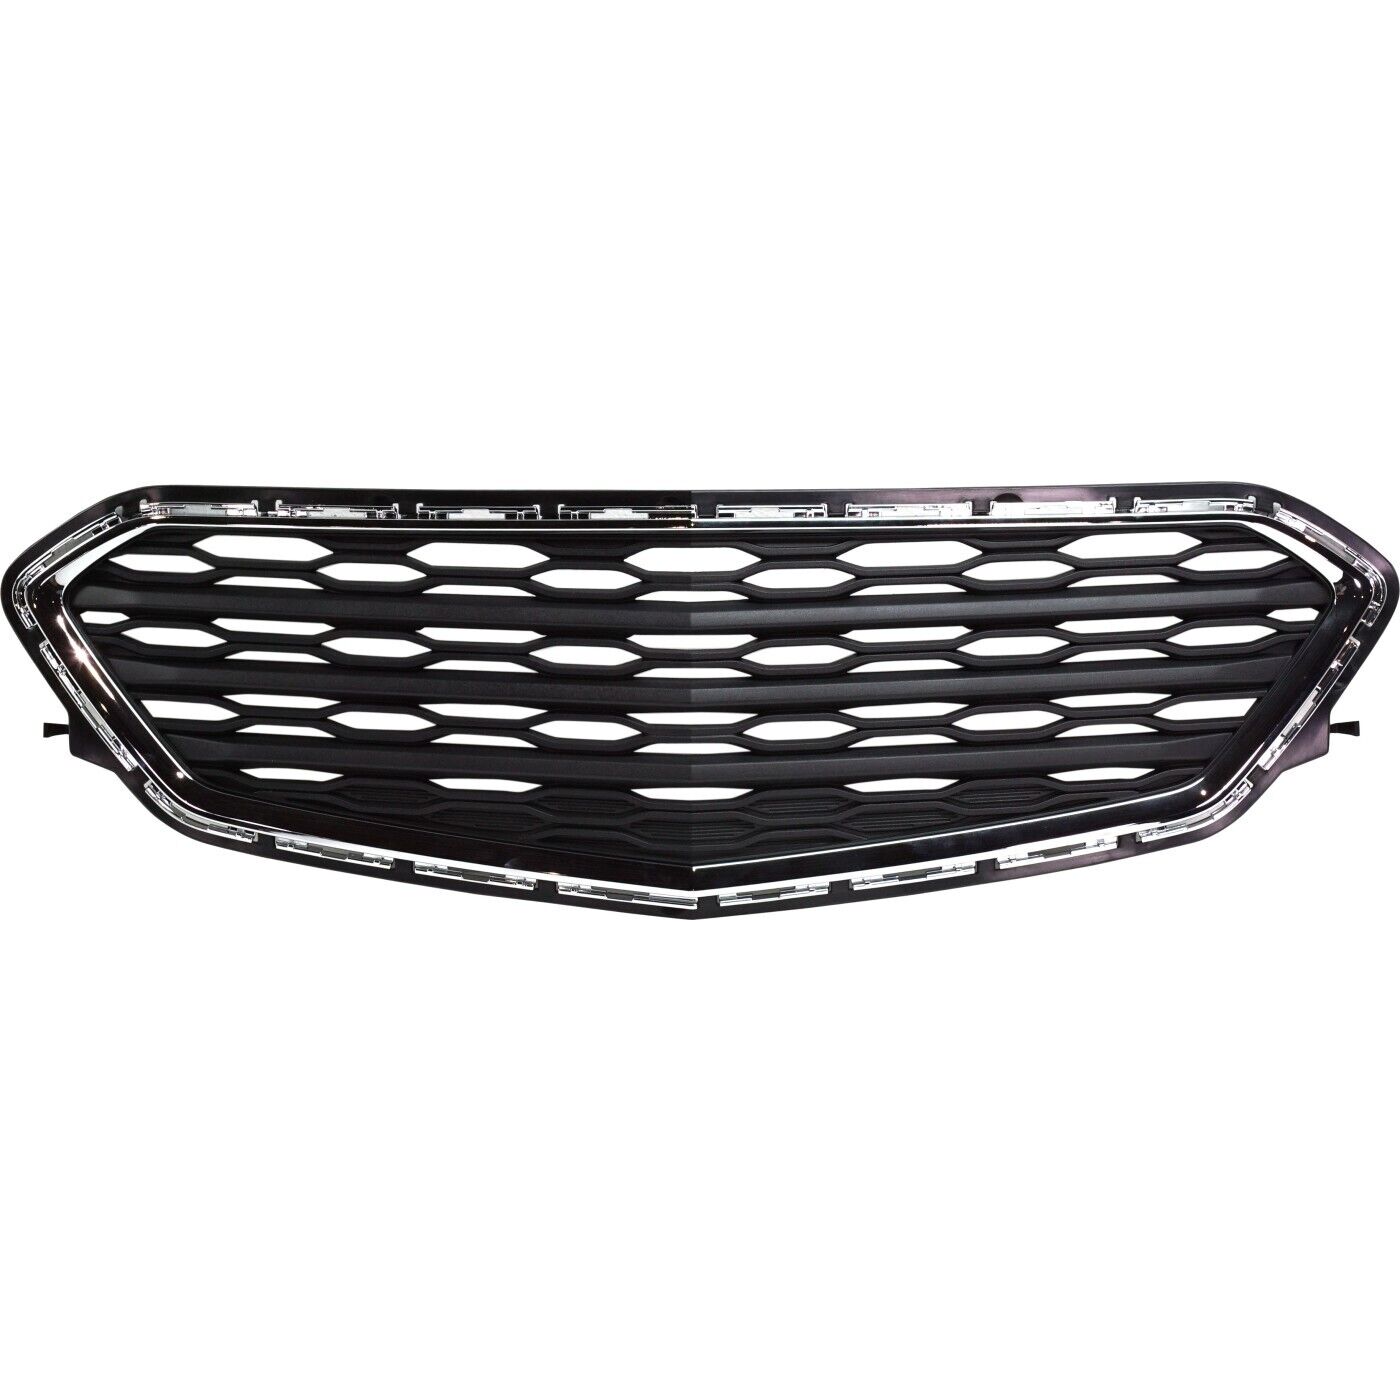 Bumper Face Bar Grilles Front for Chevy 23370464 Chevrolet Equinox 2016-2017